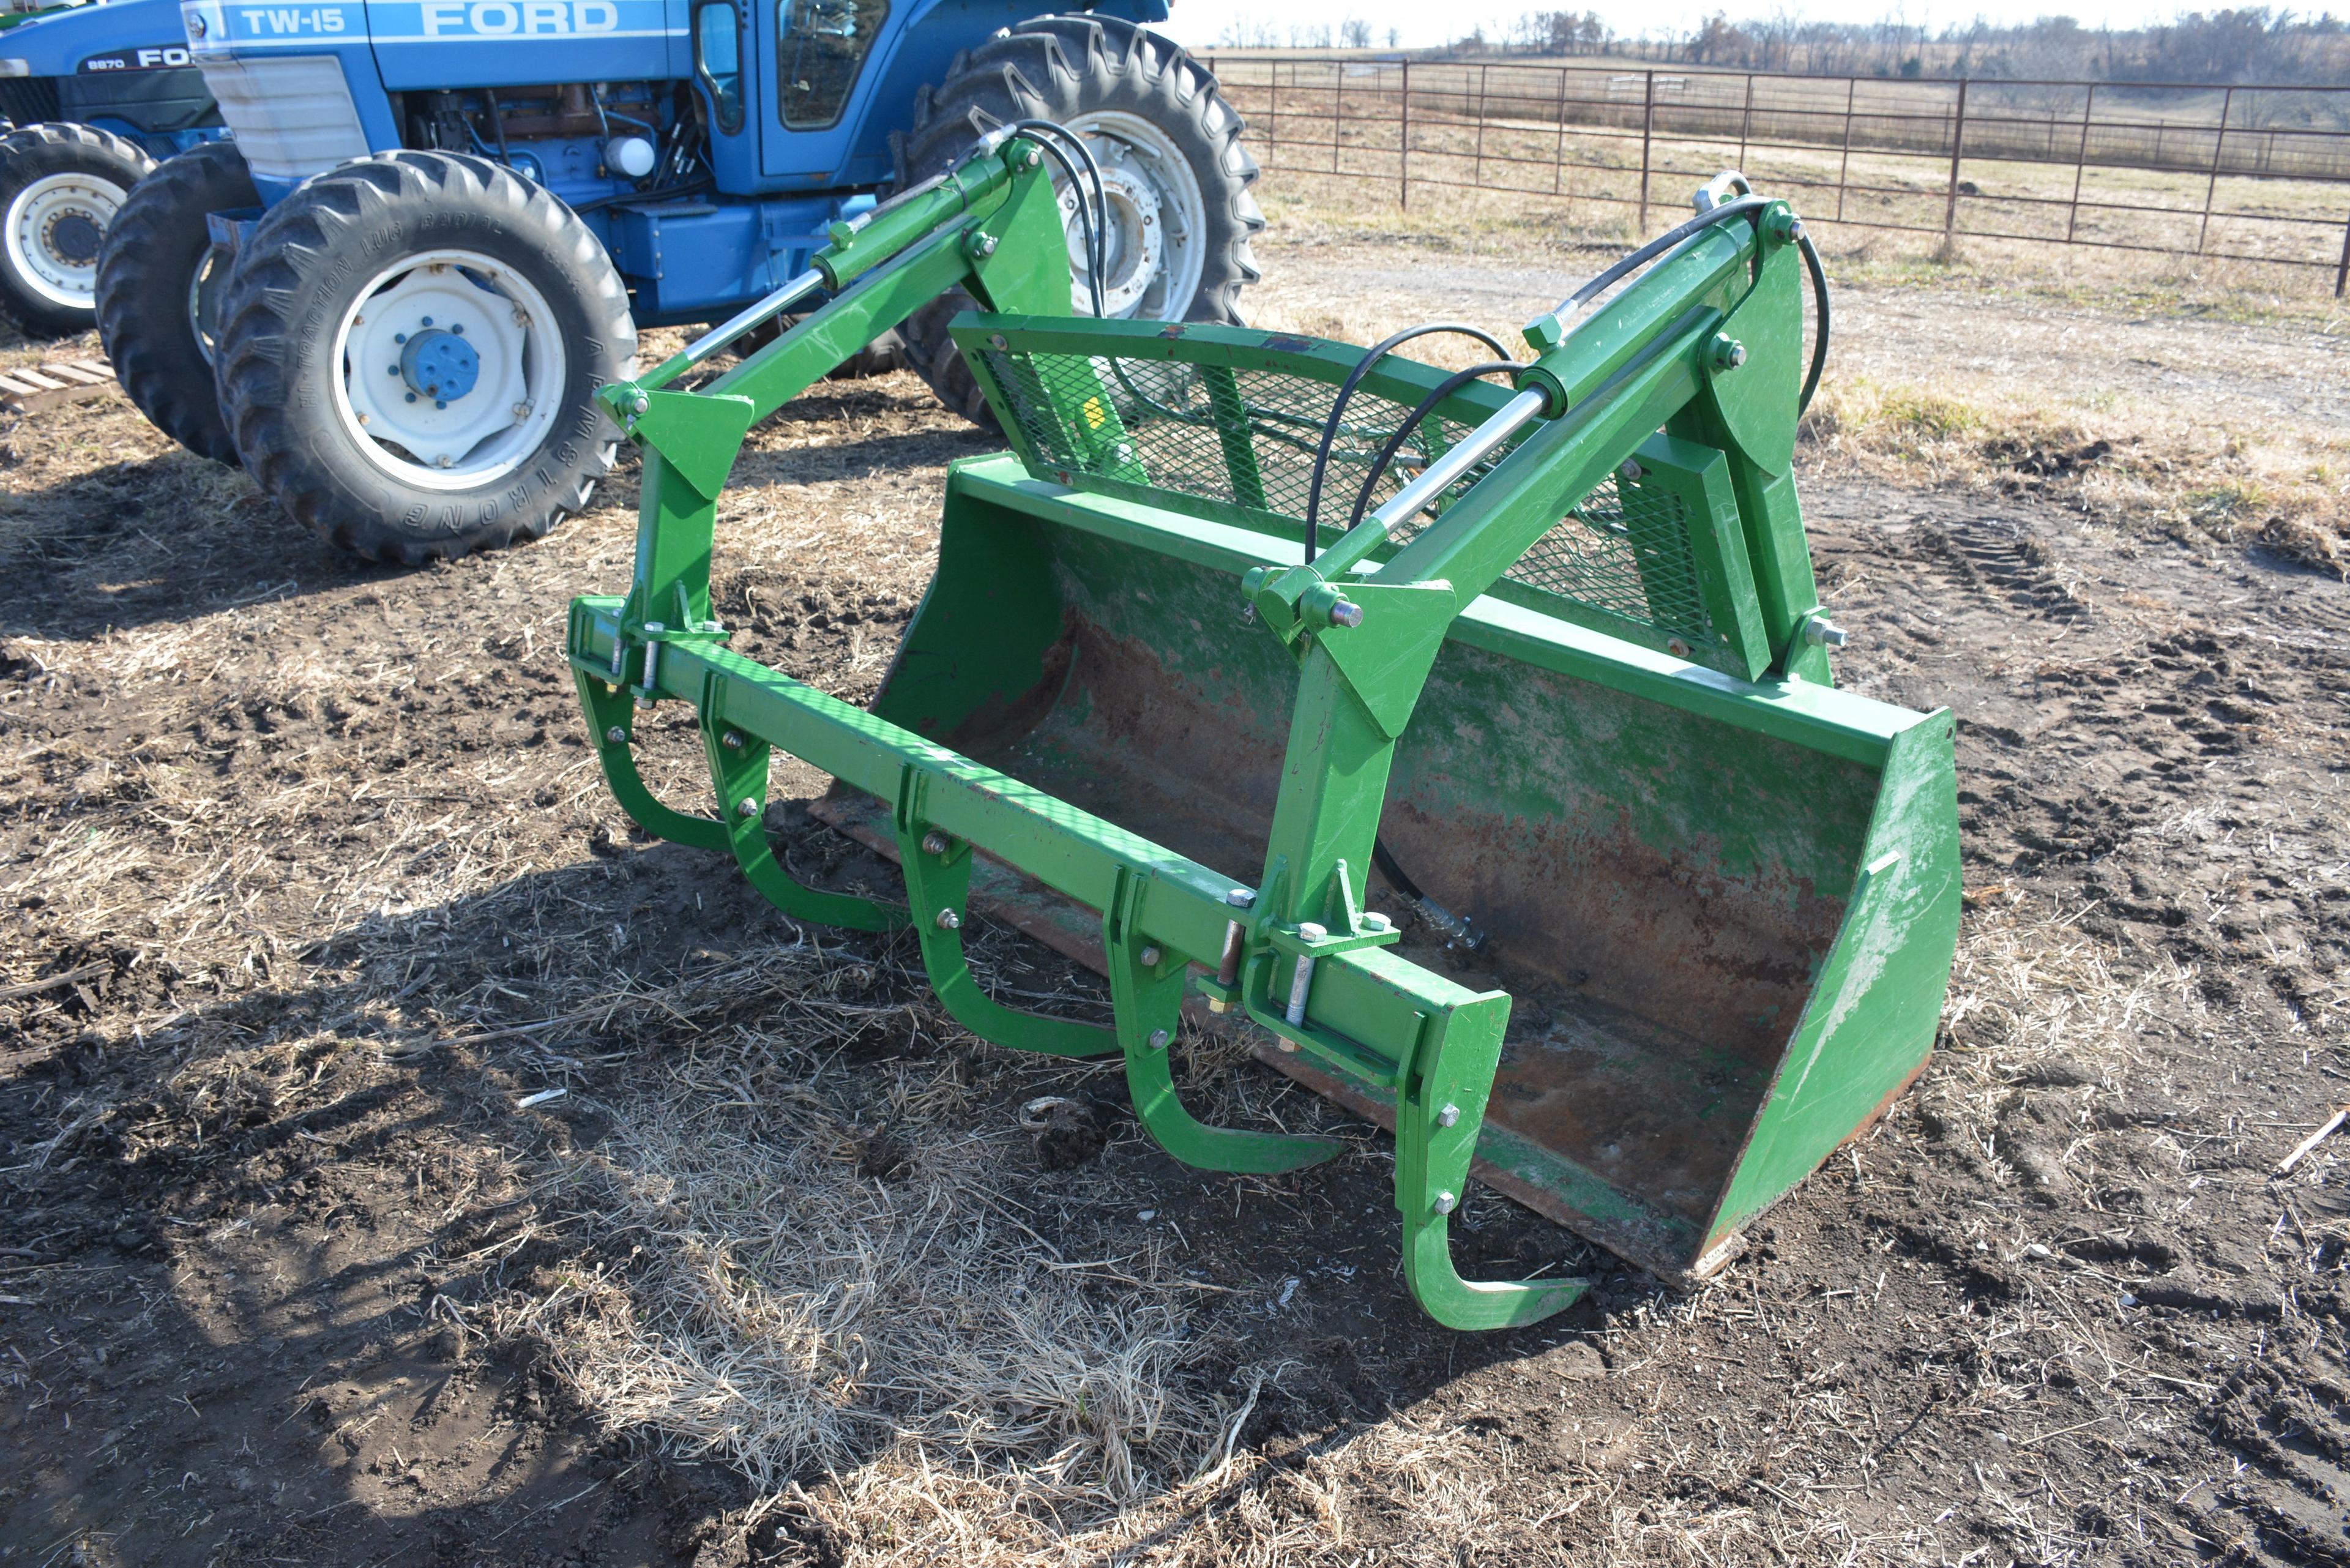 7' Grapple Bucket for Self Leveling Loader - Like New Condition